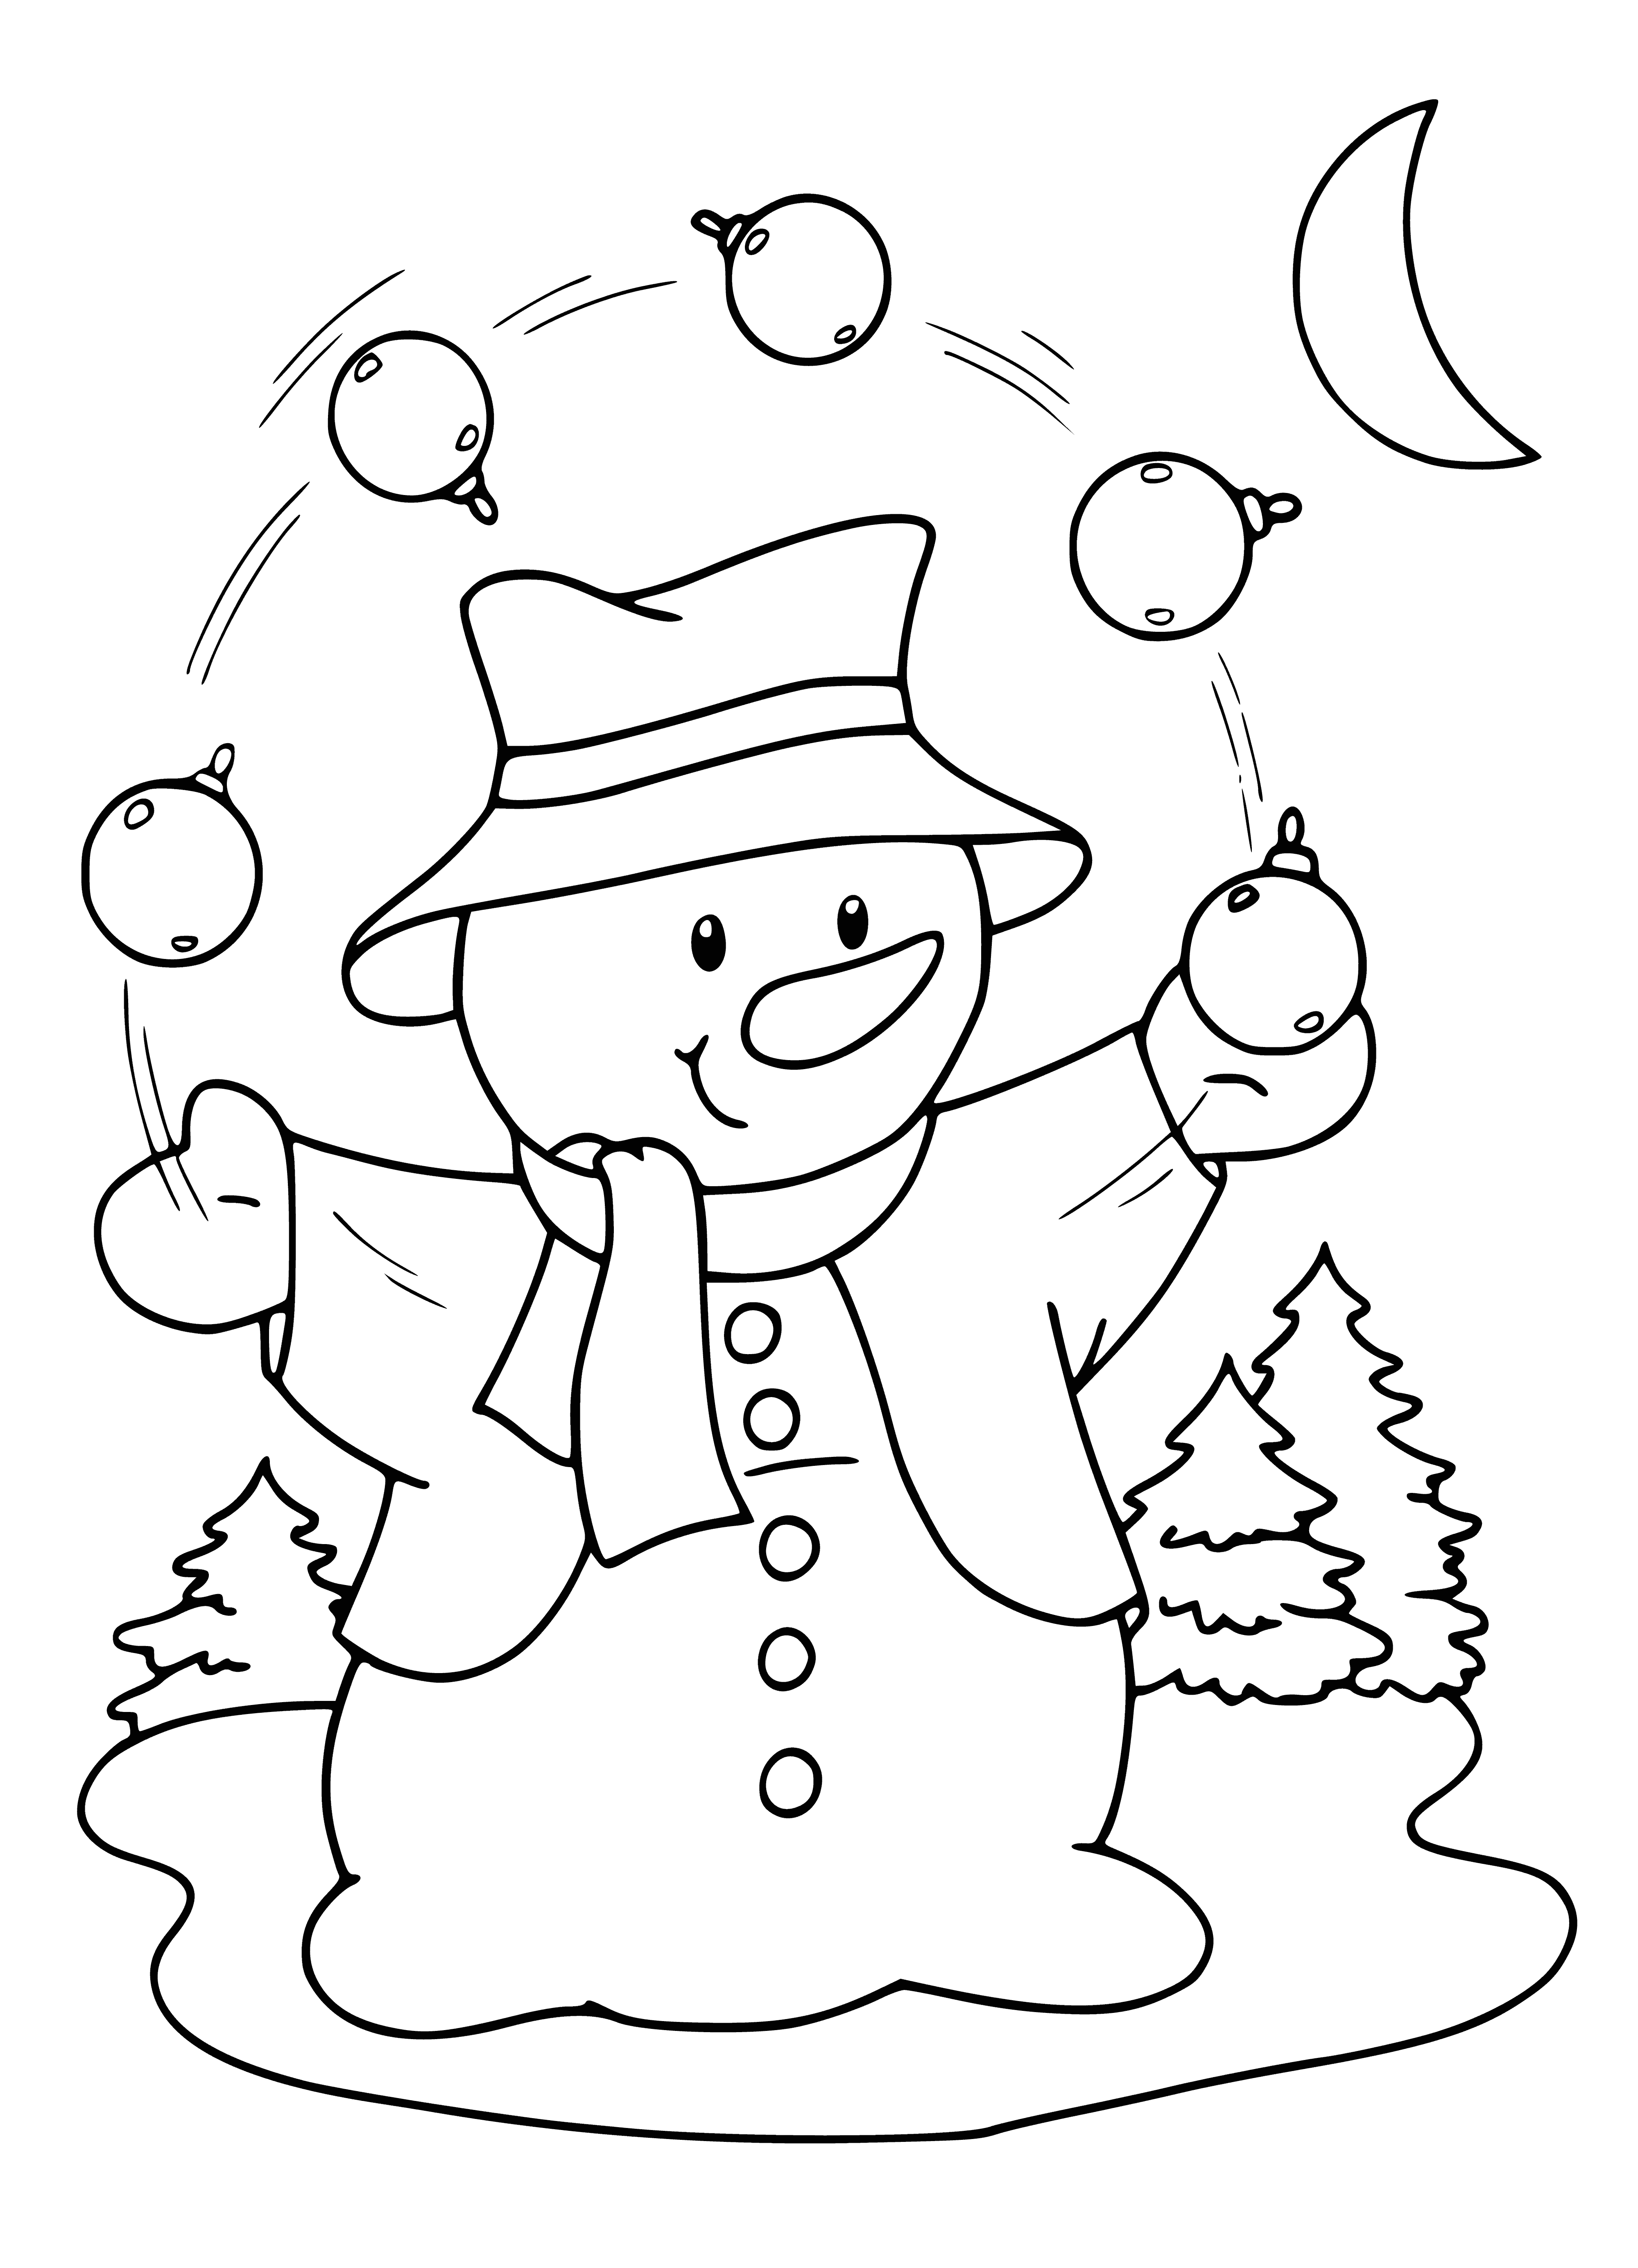 coloring page: Snowman juggles red/green ball+gold star; dons red scarf+green hat; stands on snow pile.